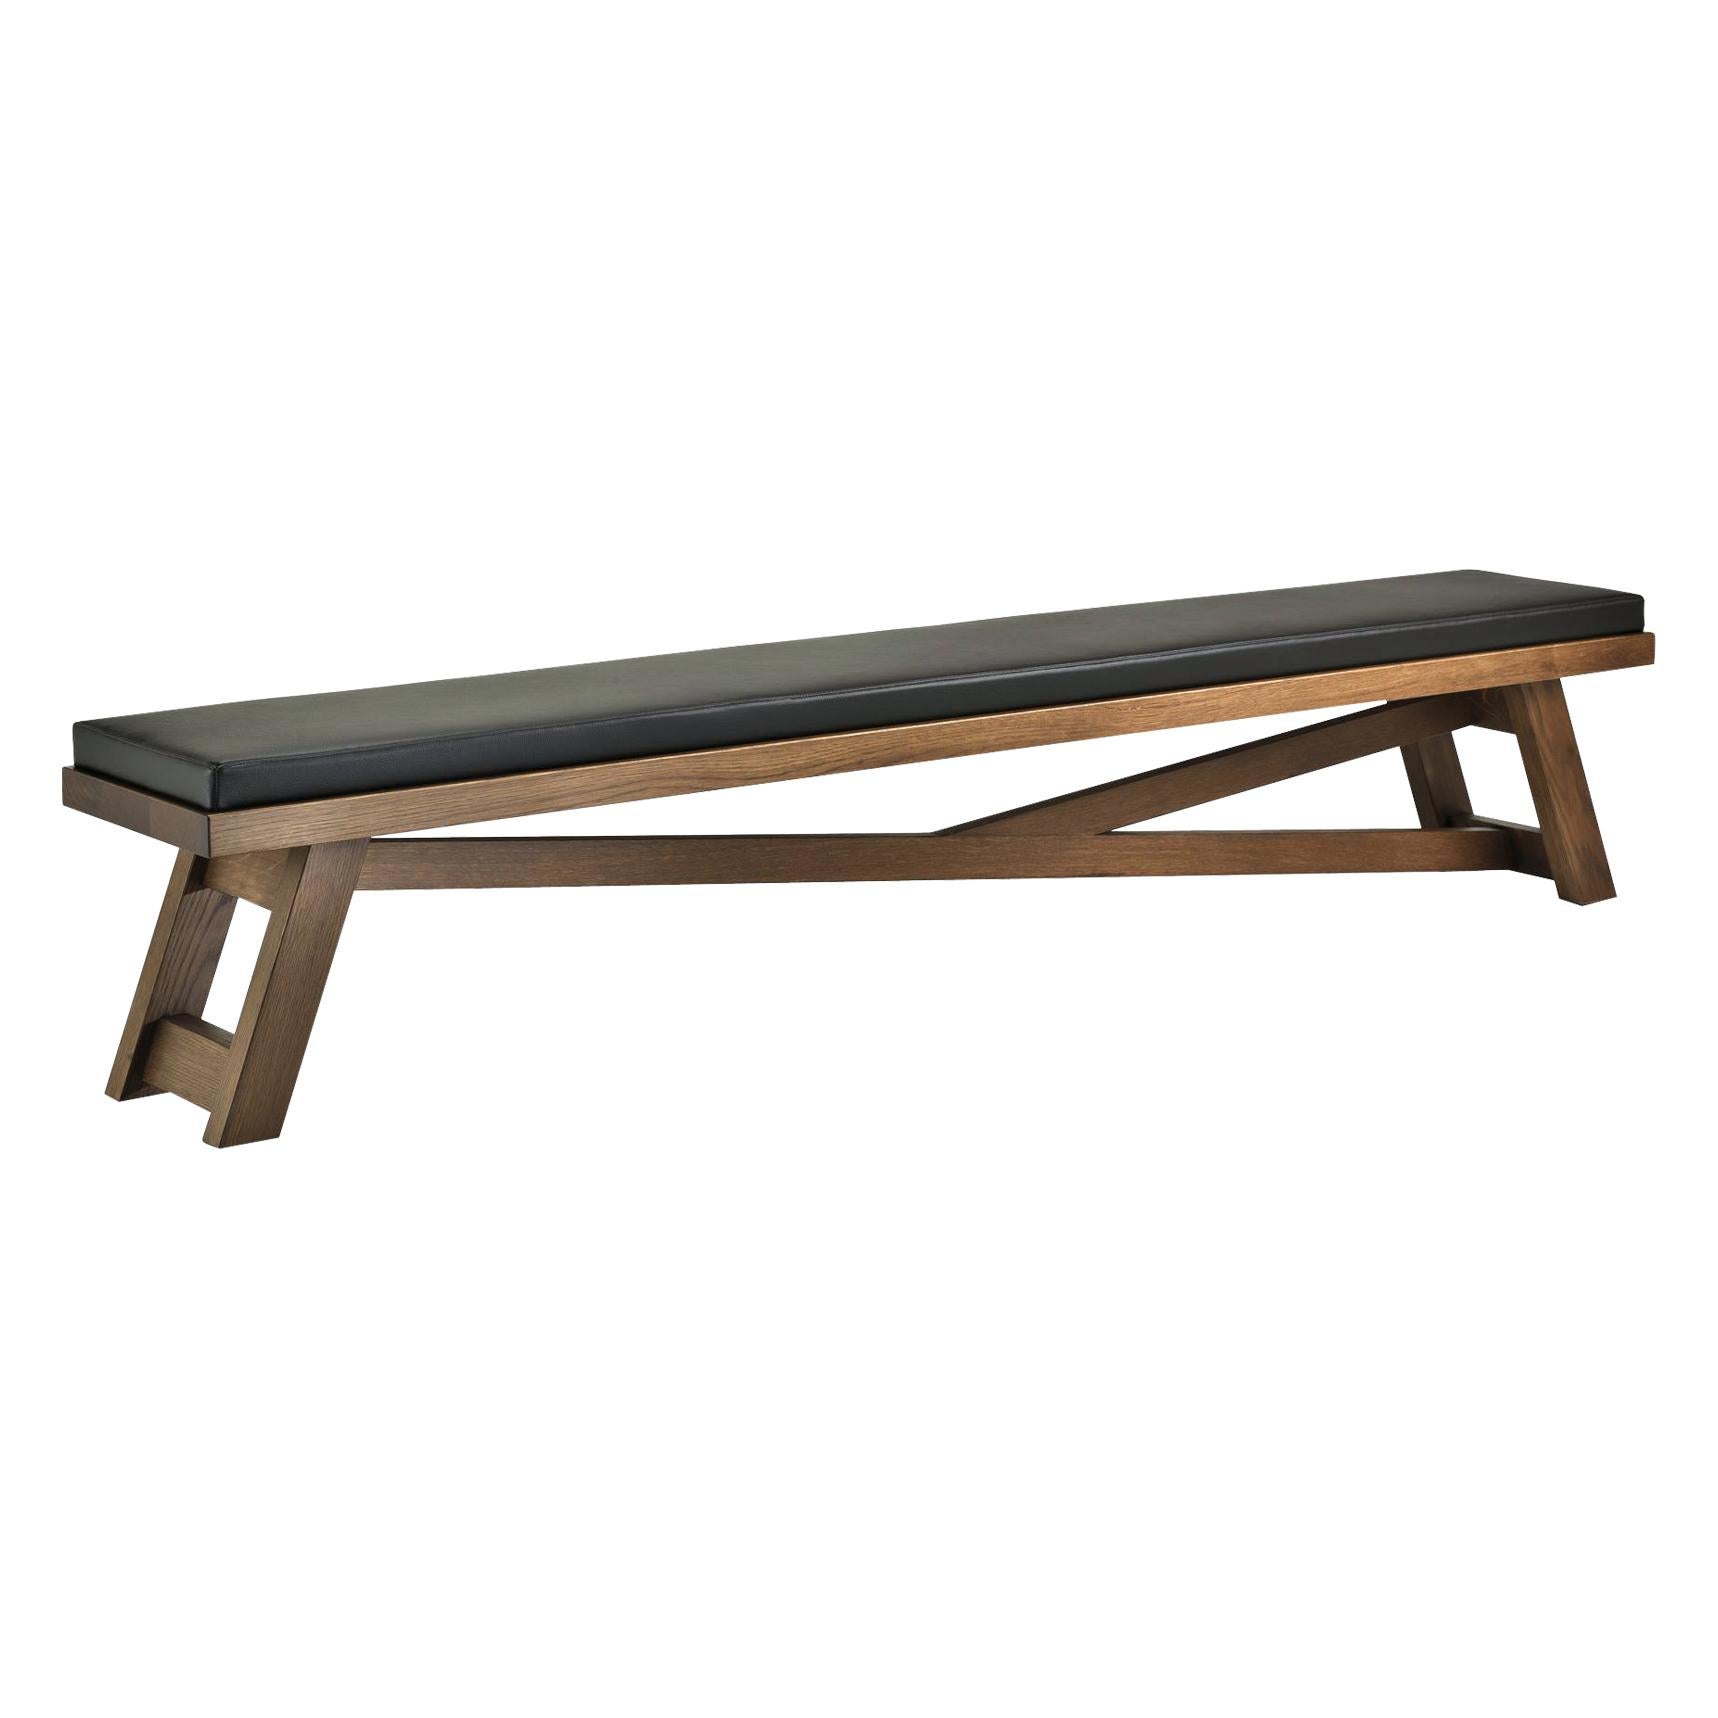 SILVANUS Black Solid Oak Long Bench with Upholstered Seat